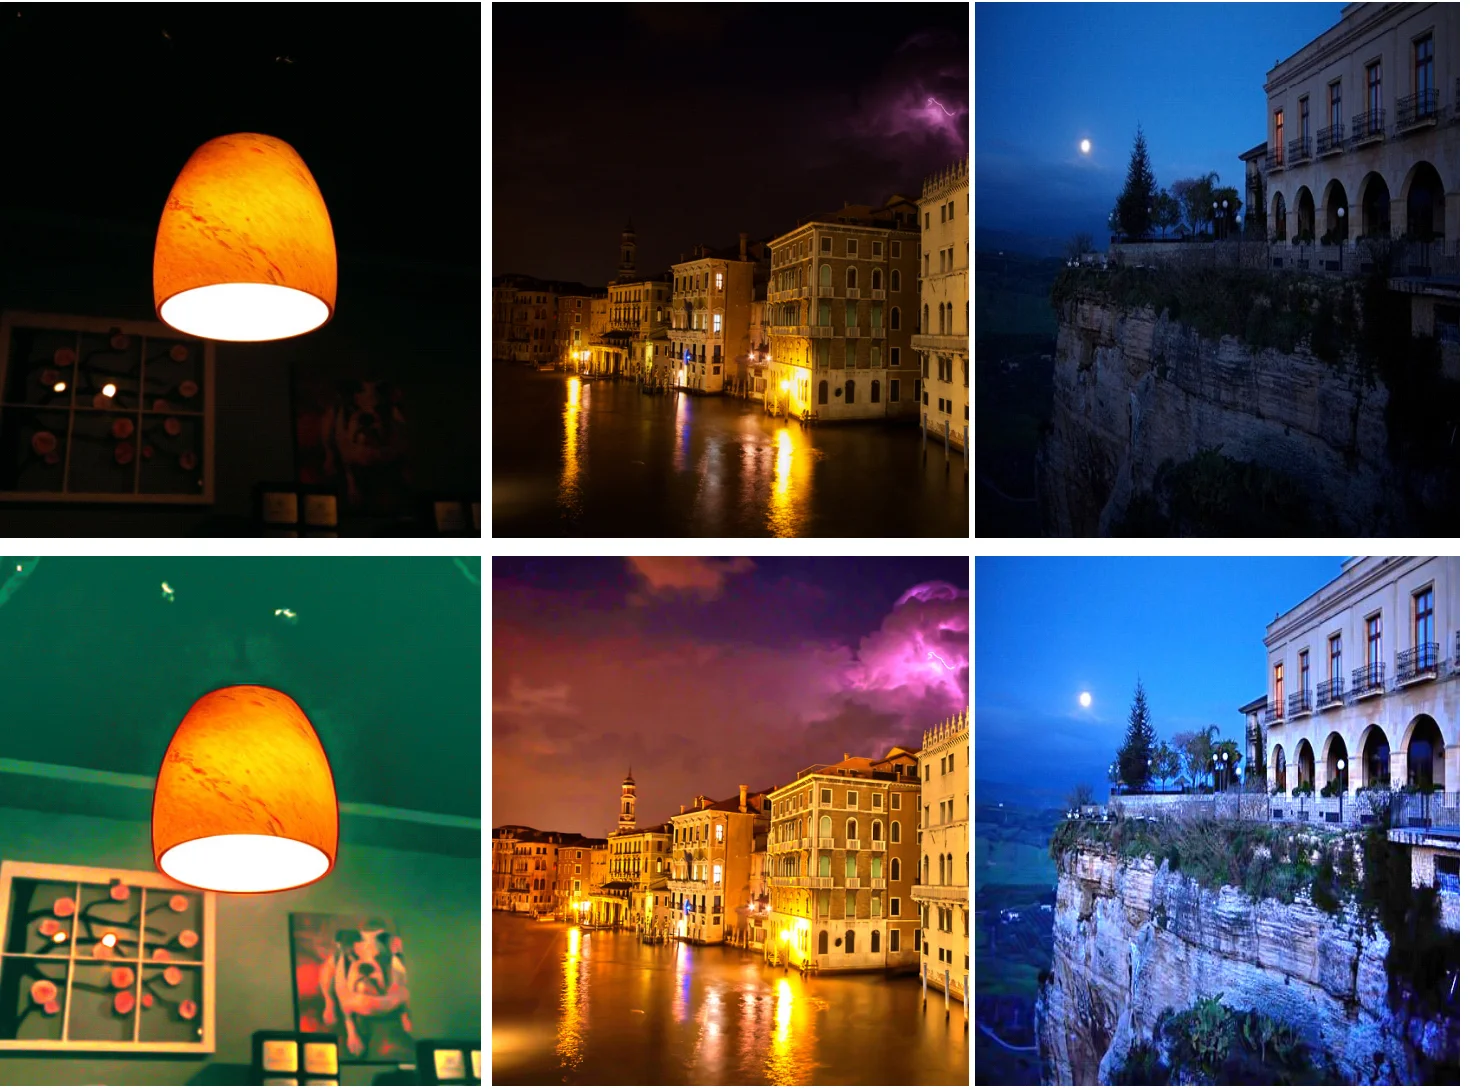 Low-light examples